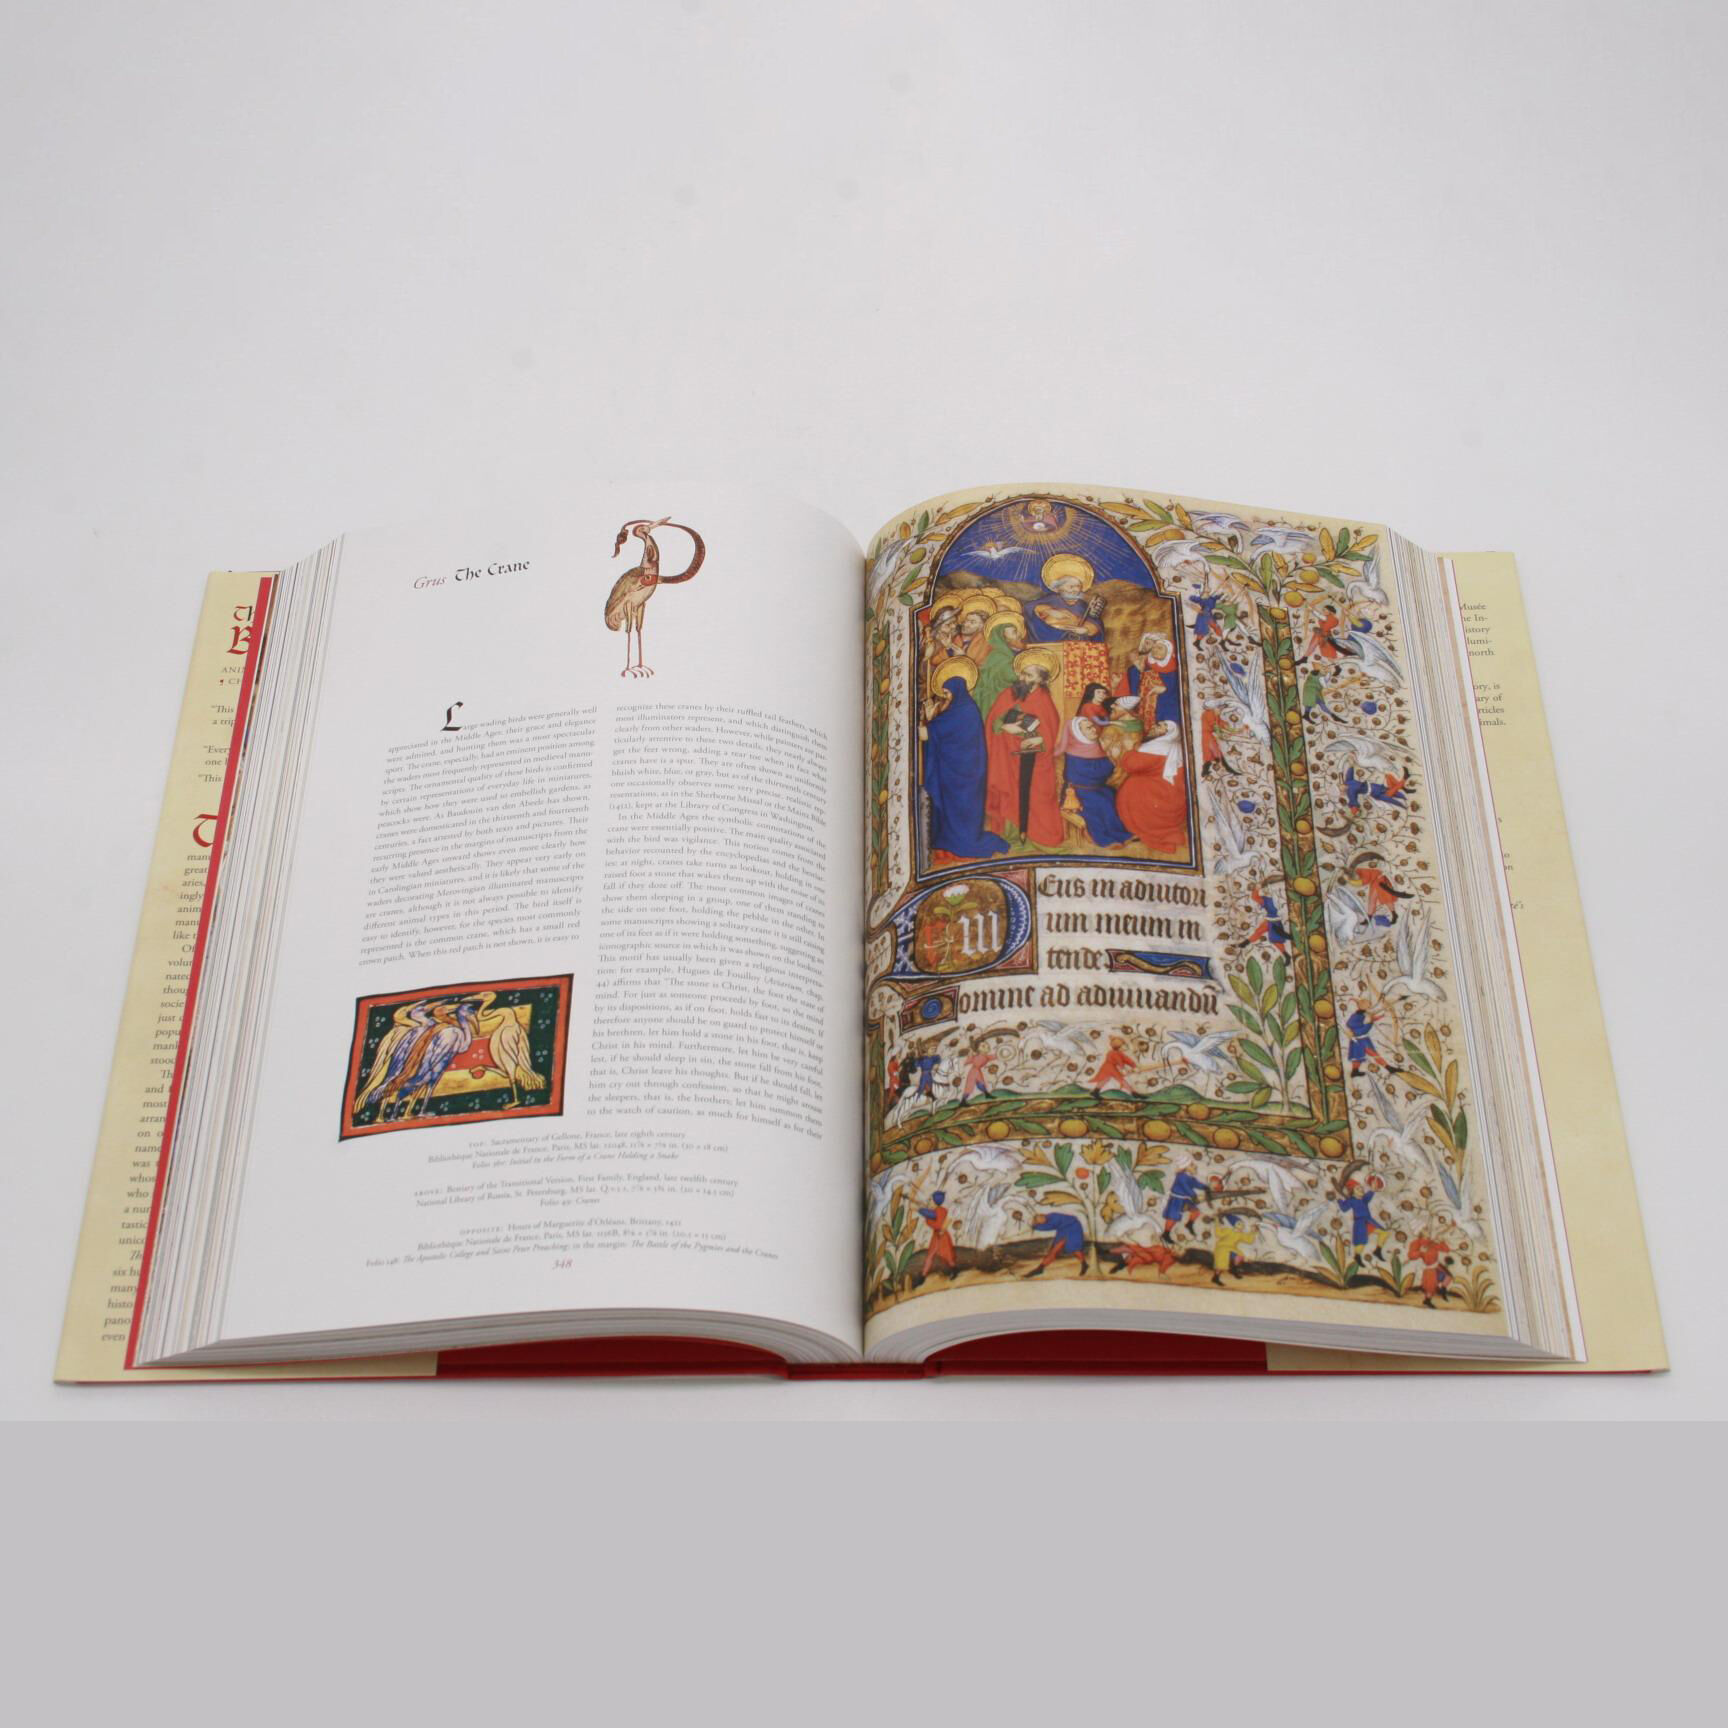 Illuminated　Manuscripts　Esoterica　Grand　books　(Dragonet　Garage　in　The　Bestiary　Animals　in　Medieval　Shop　Edition):　buy